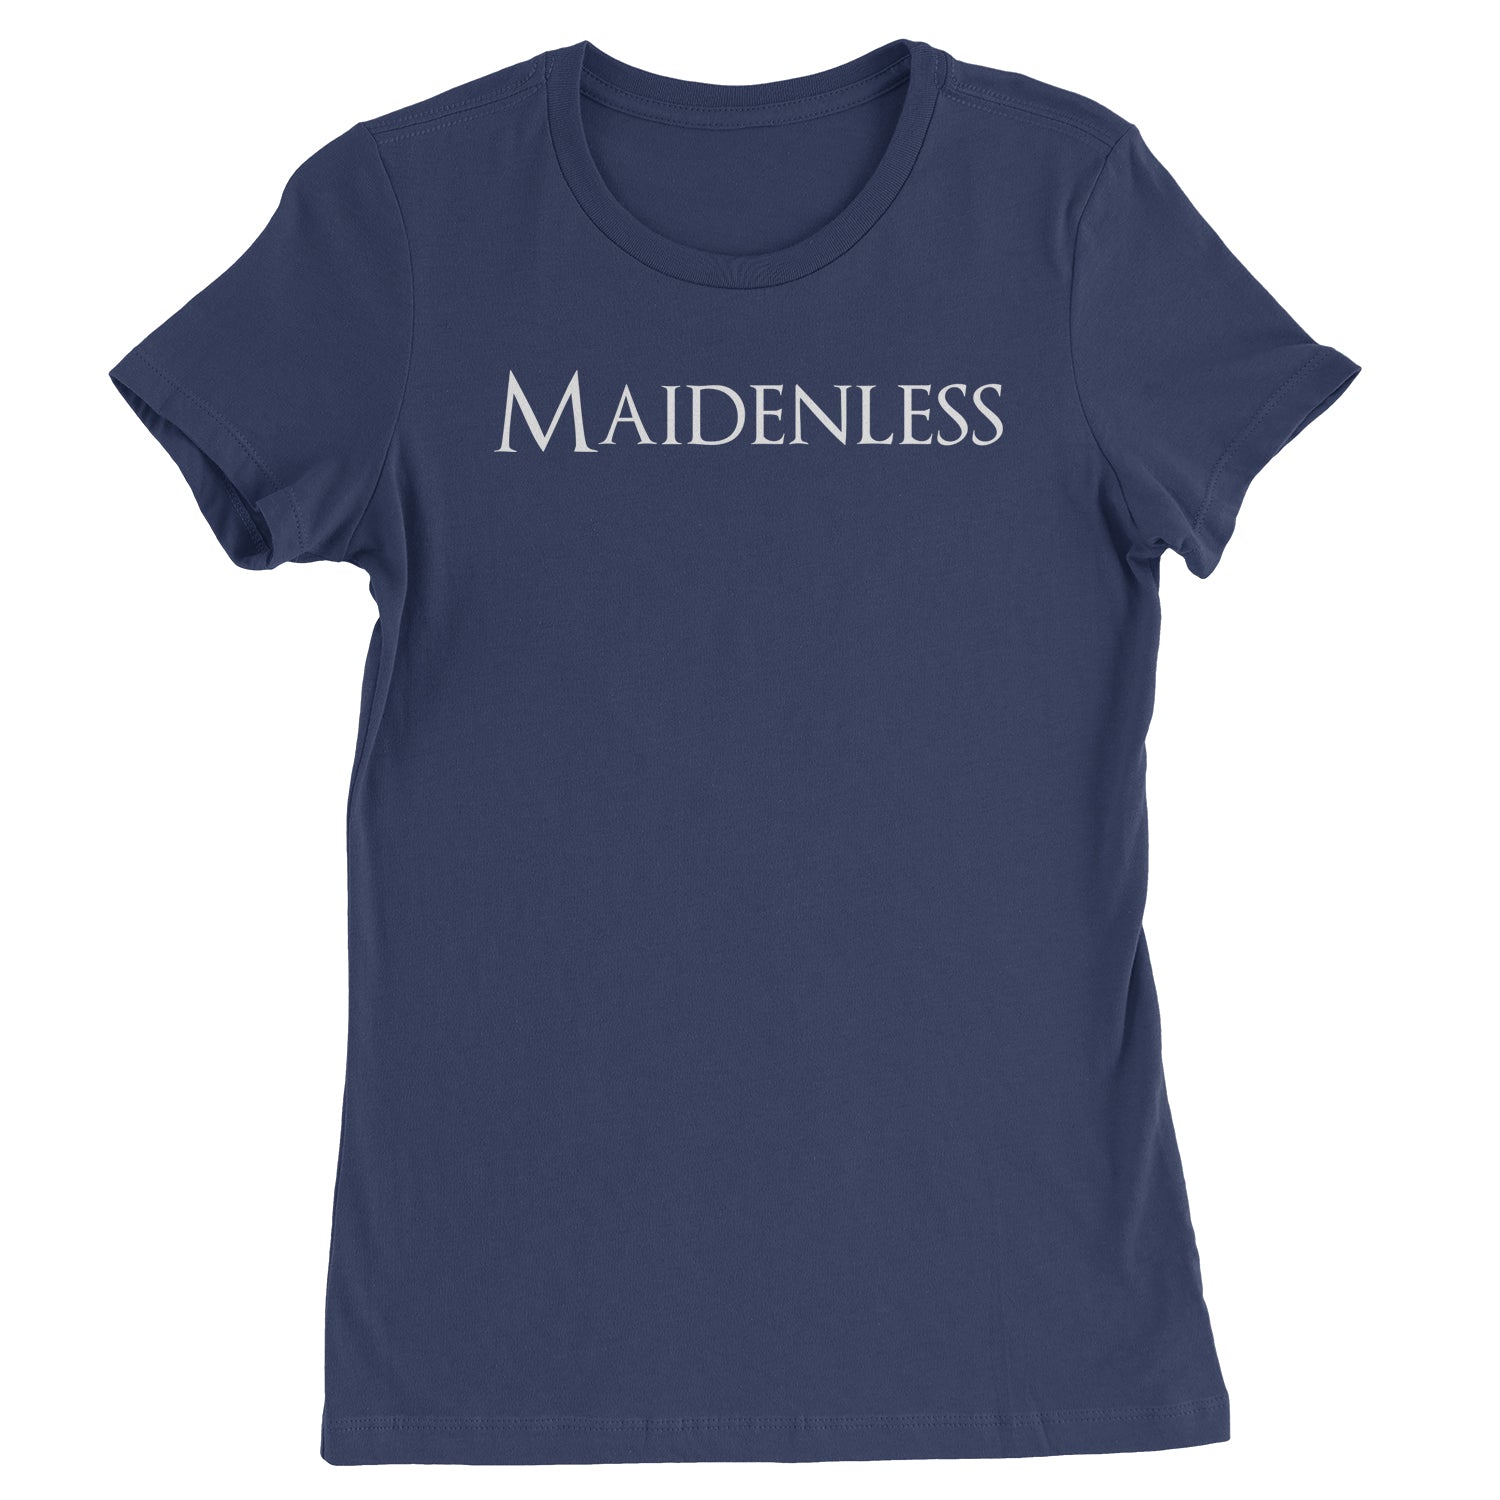 Maidenless Womens T-shirt elden, game, video by Expression Tees